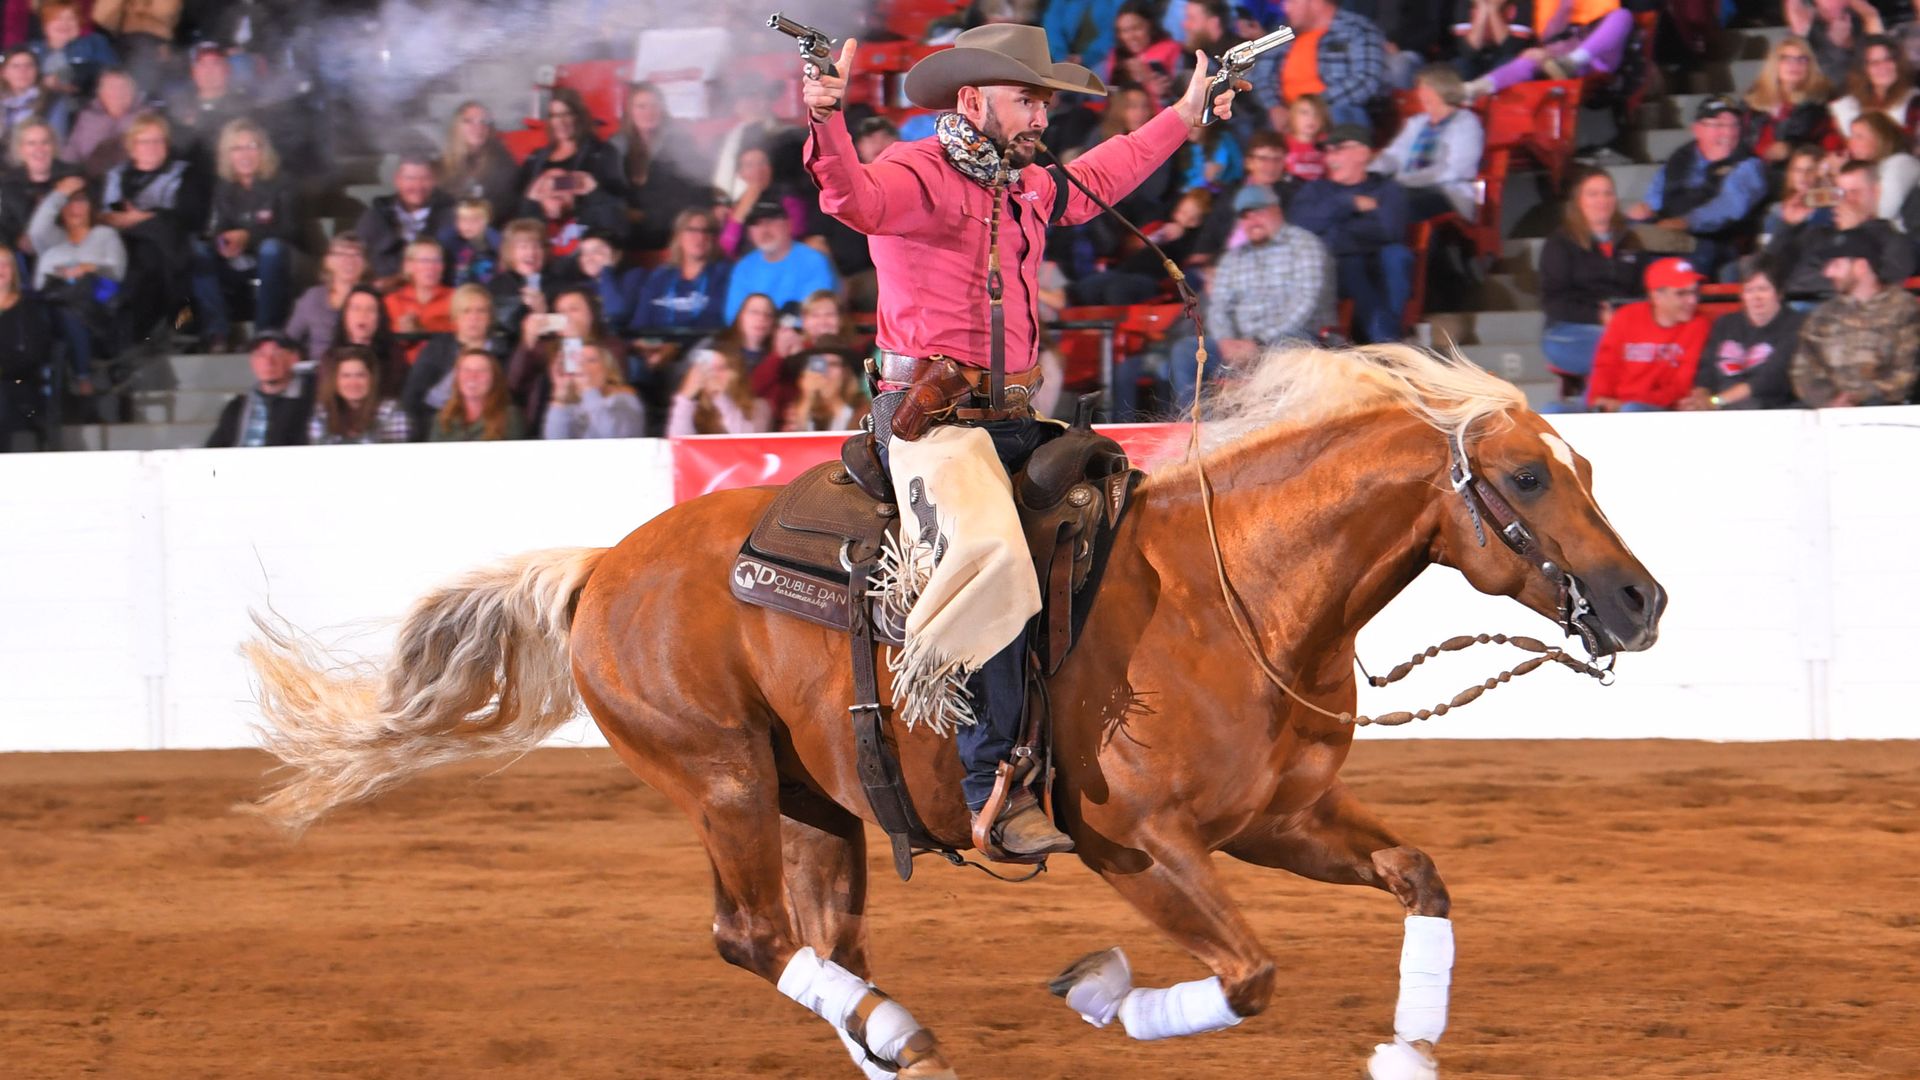 A man rides a horse while wielding two pistols during the All American Quarter Horse Congress competition in Columbus